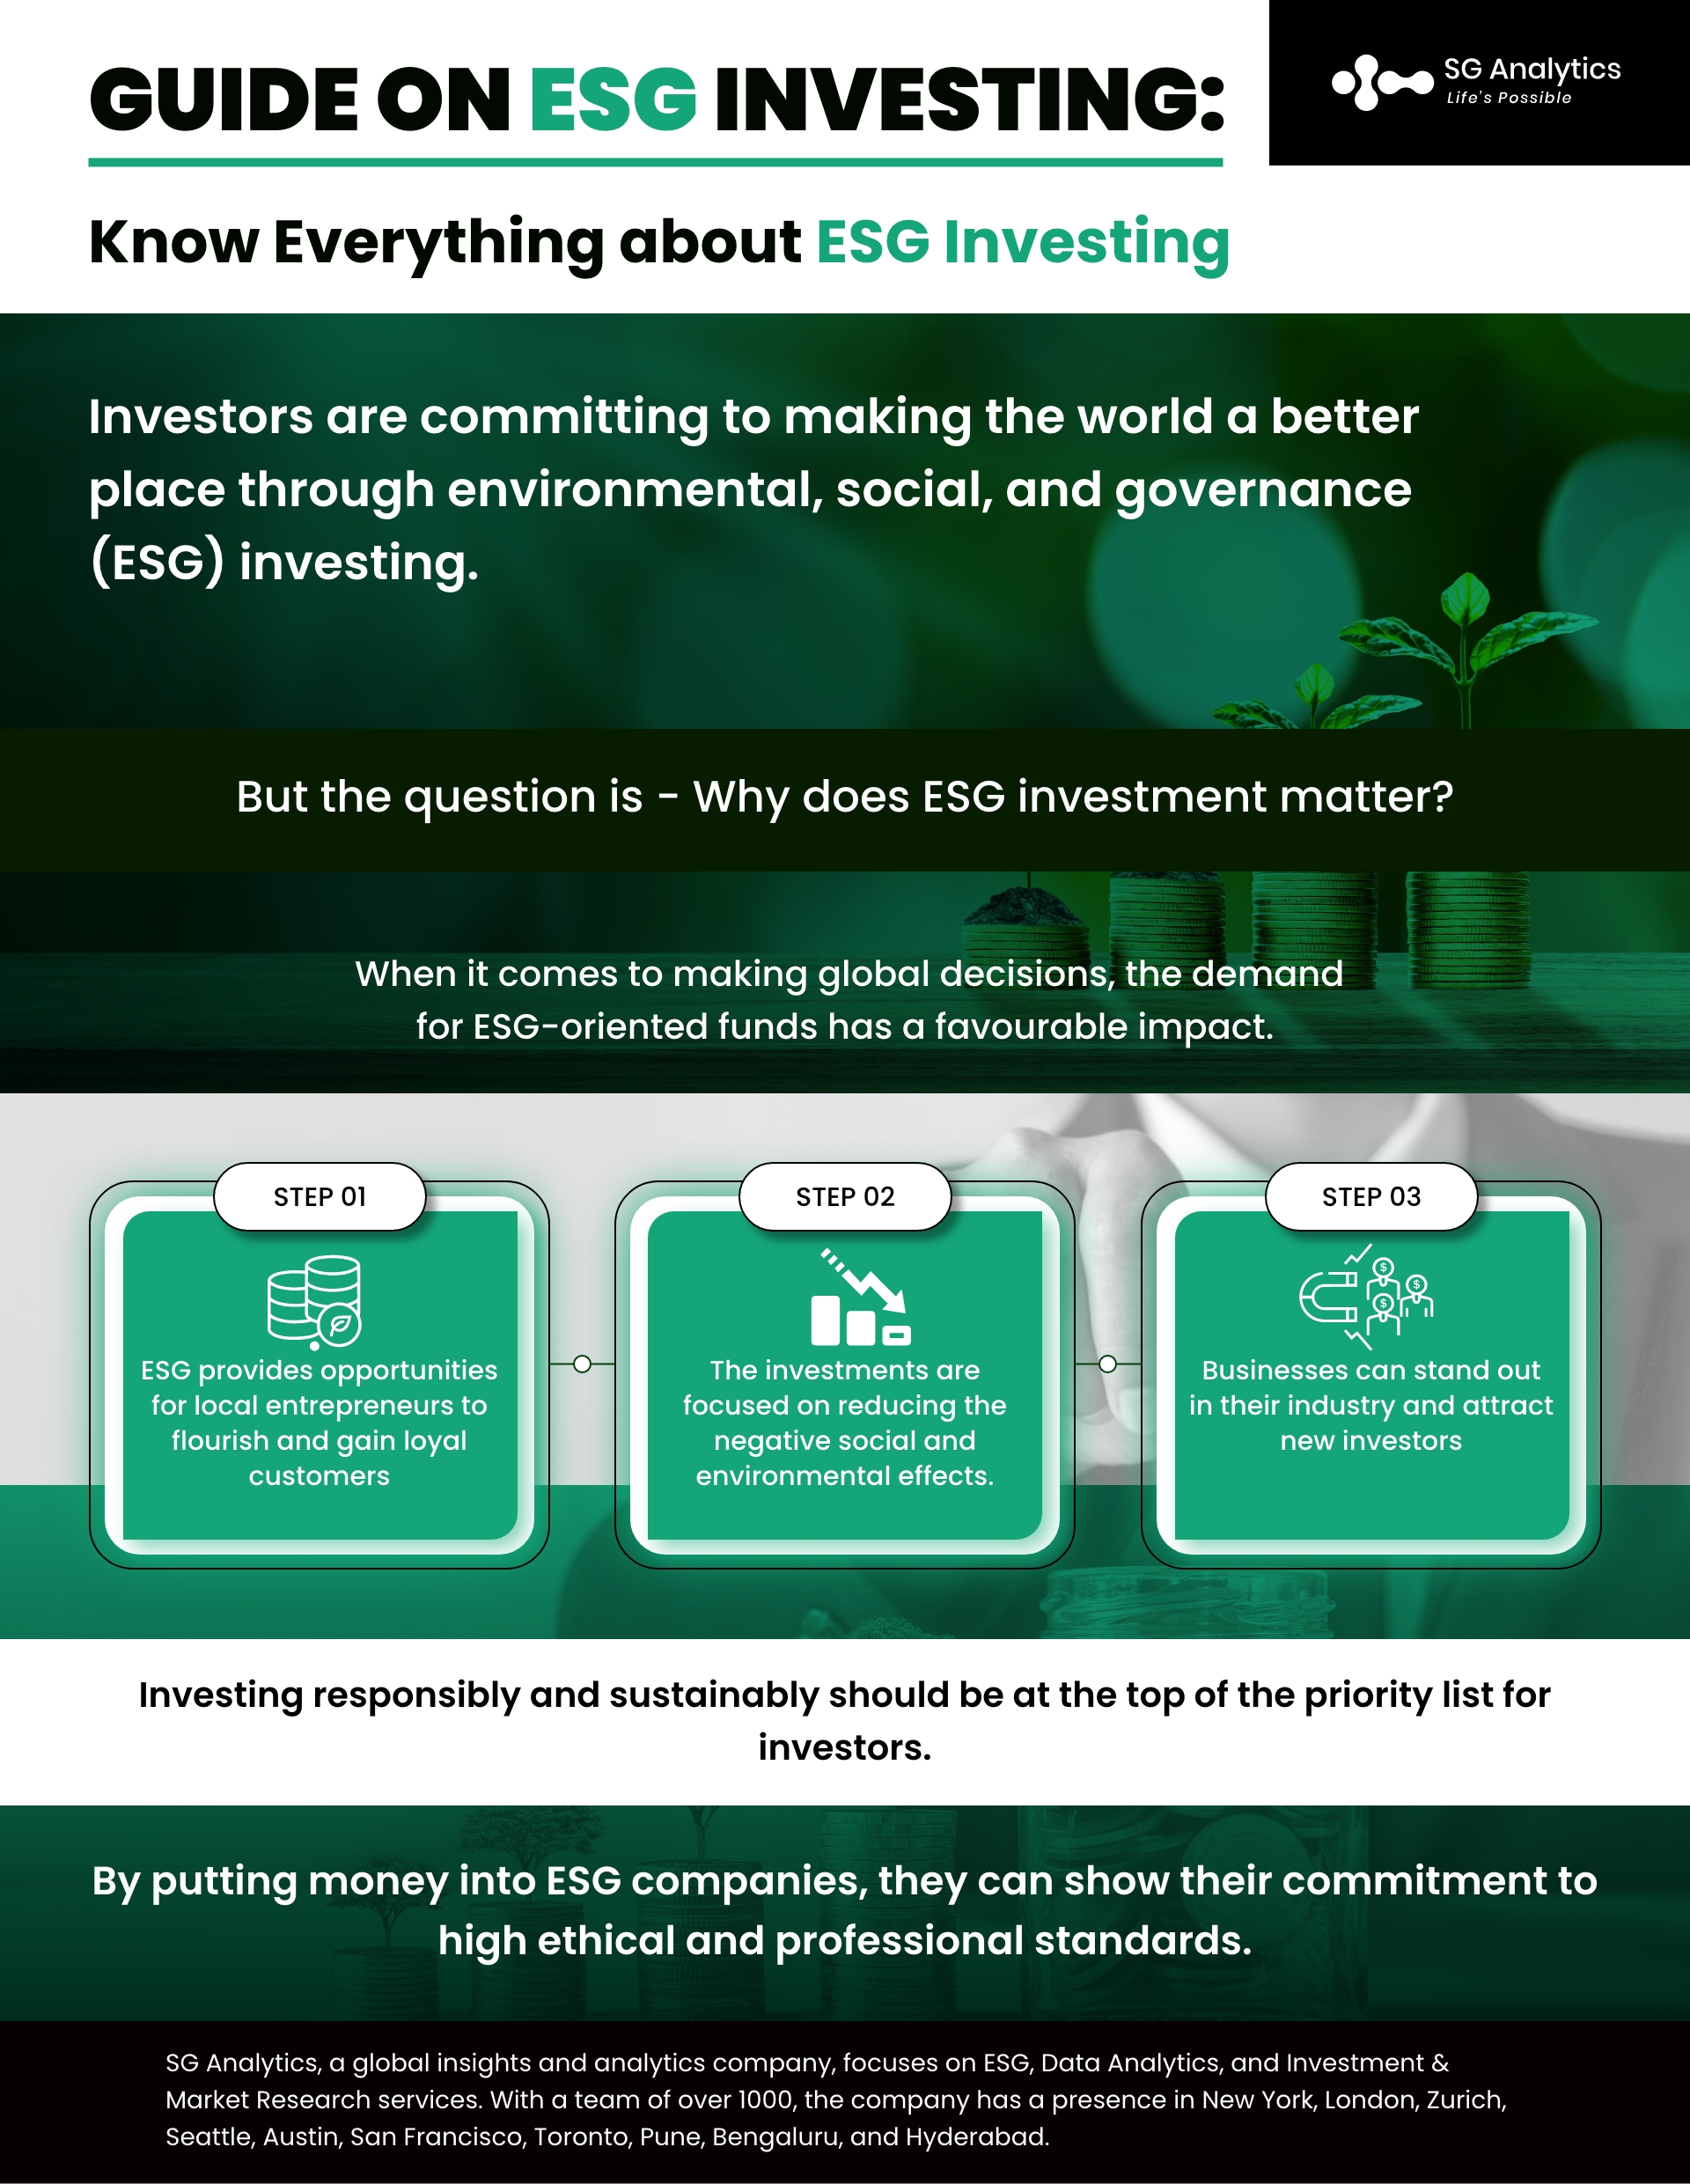 SGAnalytics_Infographic_Guide on ESG Investing: Know Everything about ESG Investing